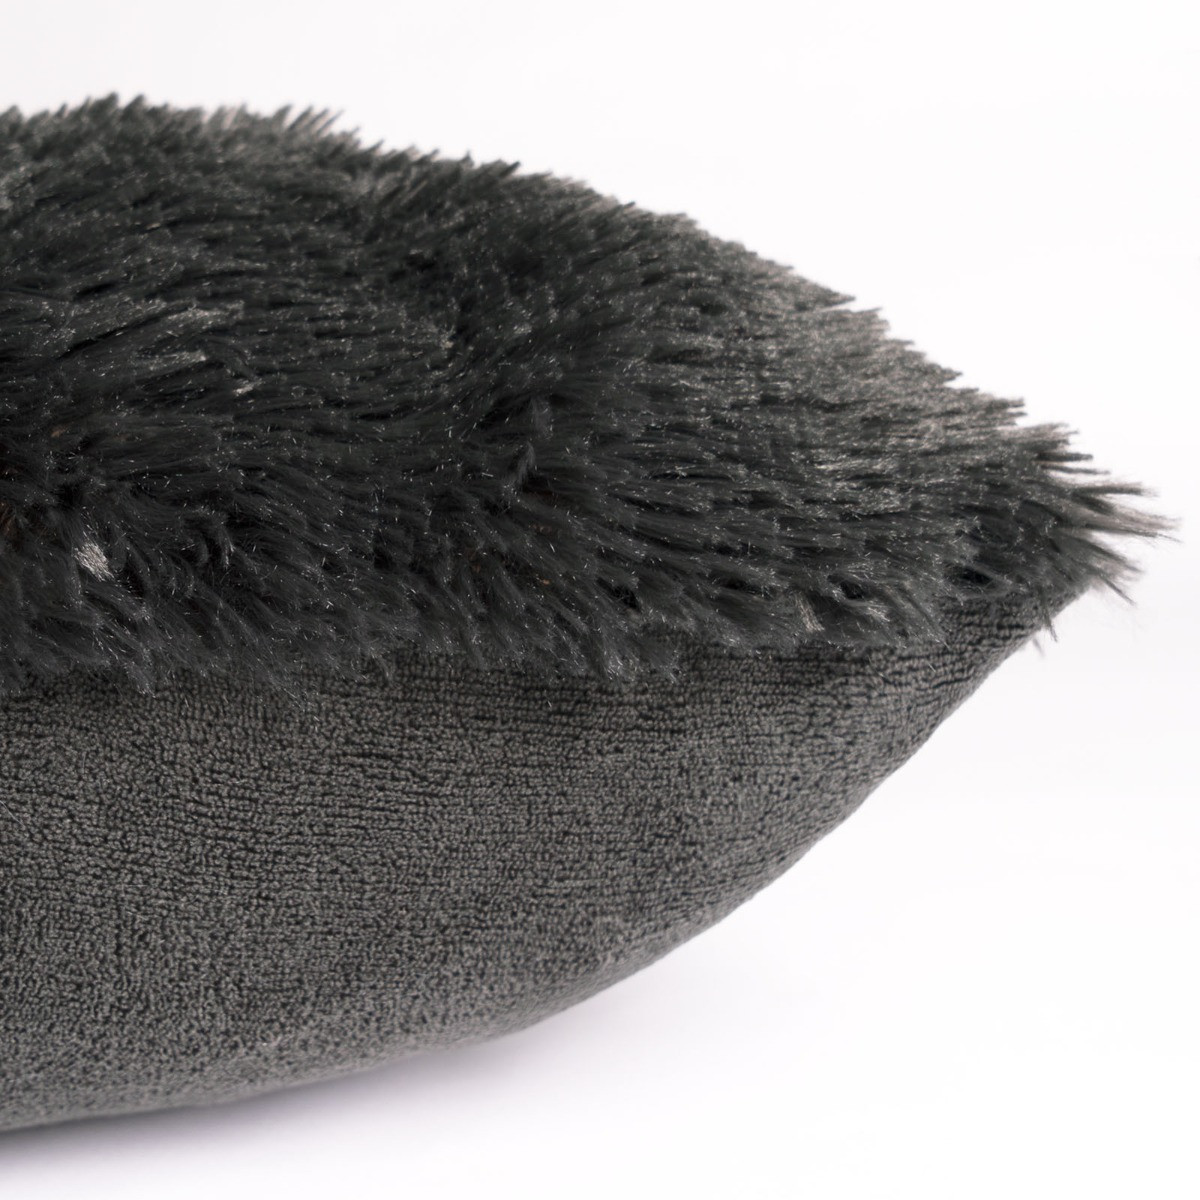 Sienna Fluffy Cushion Covers - Charcoal>